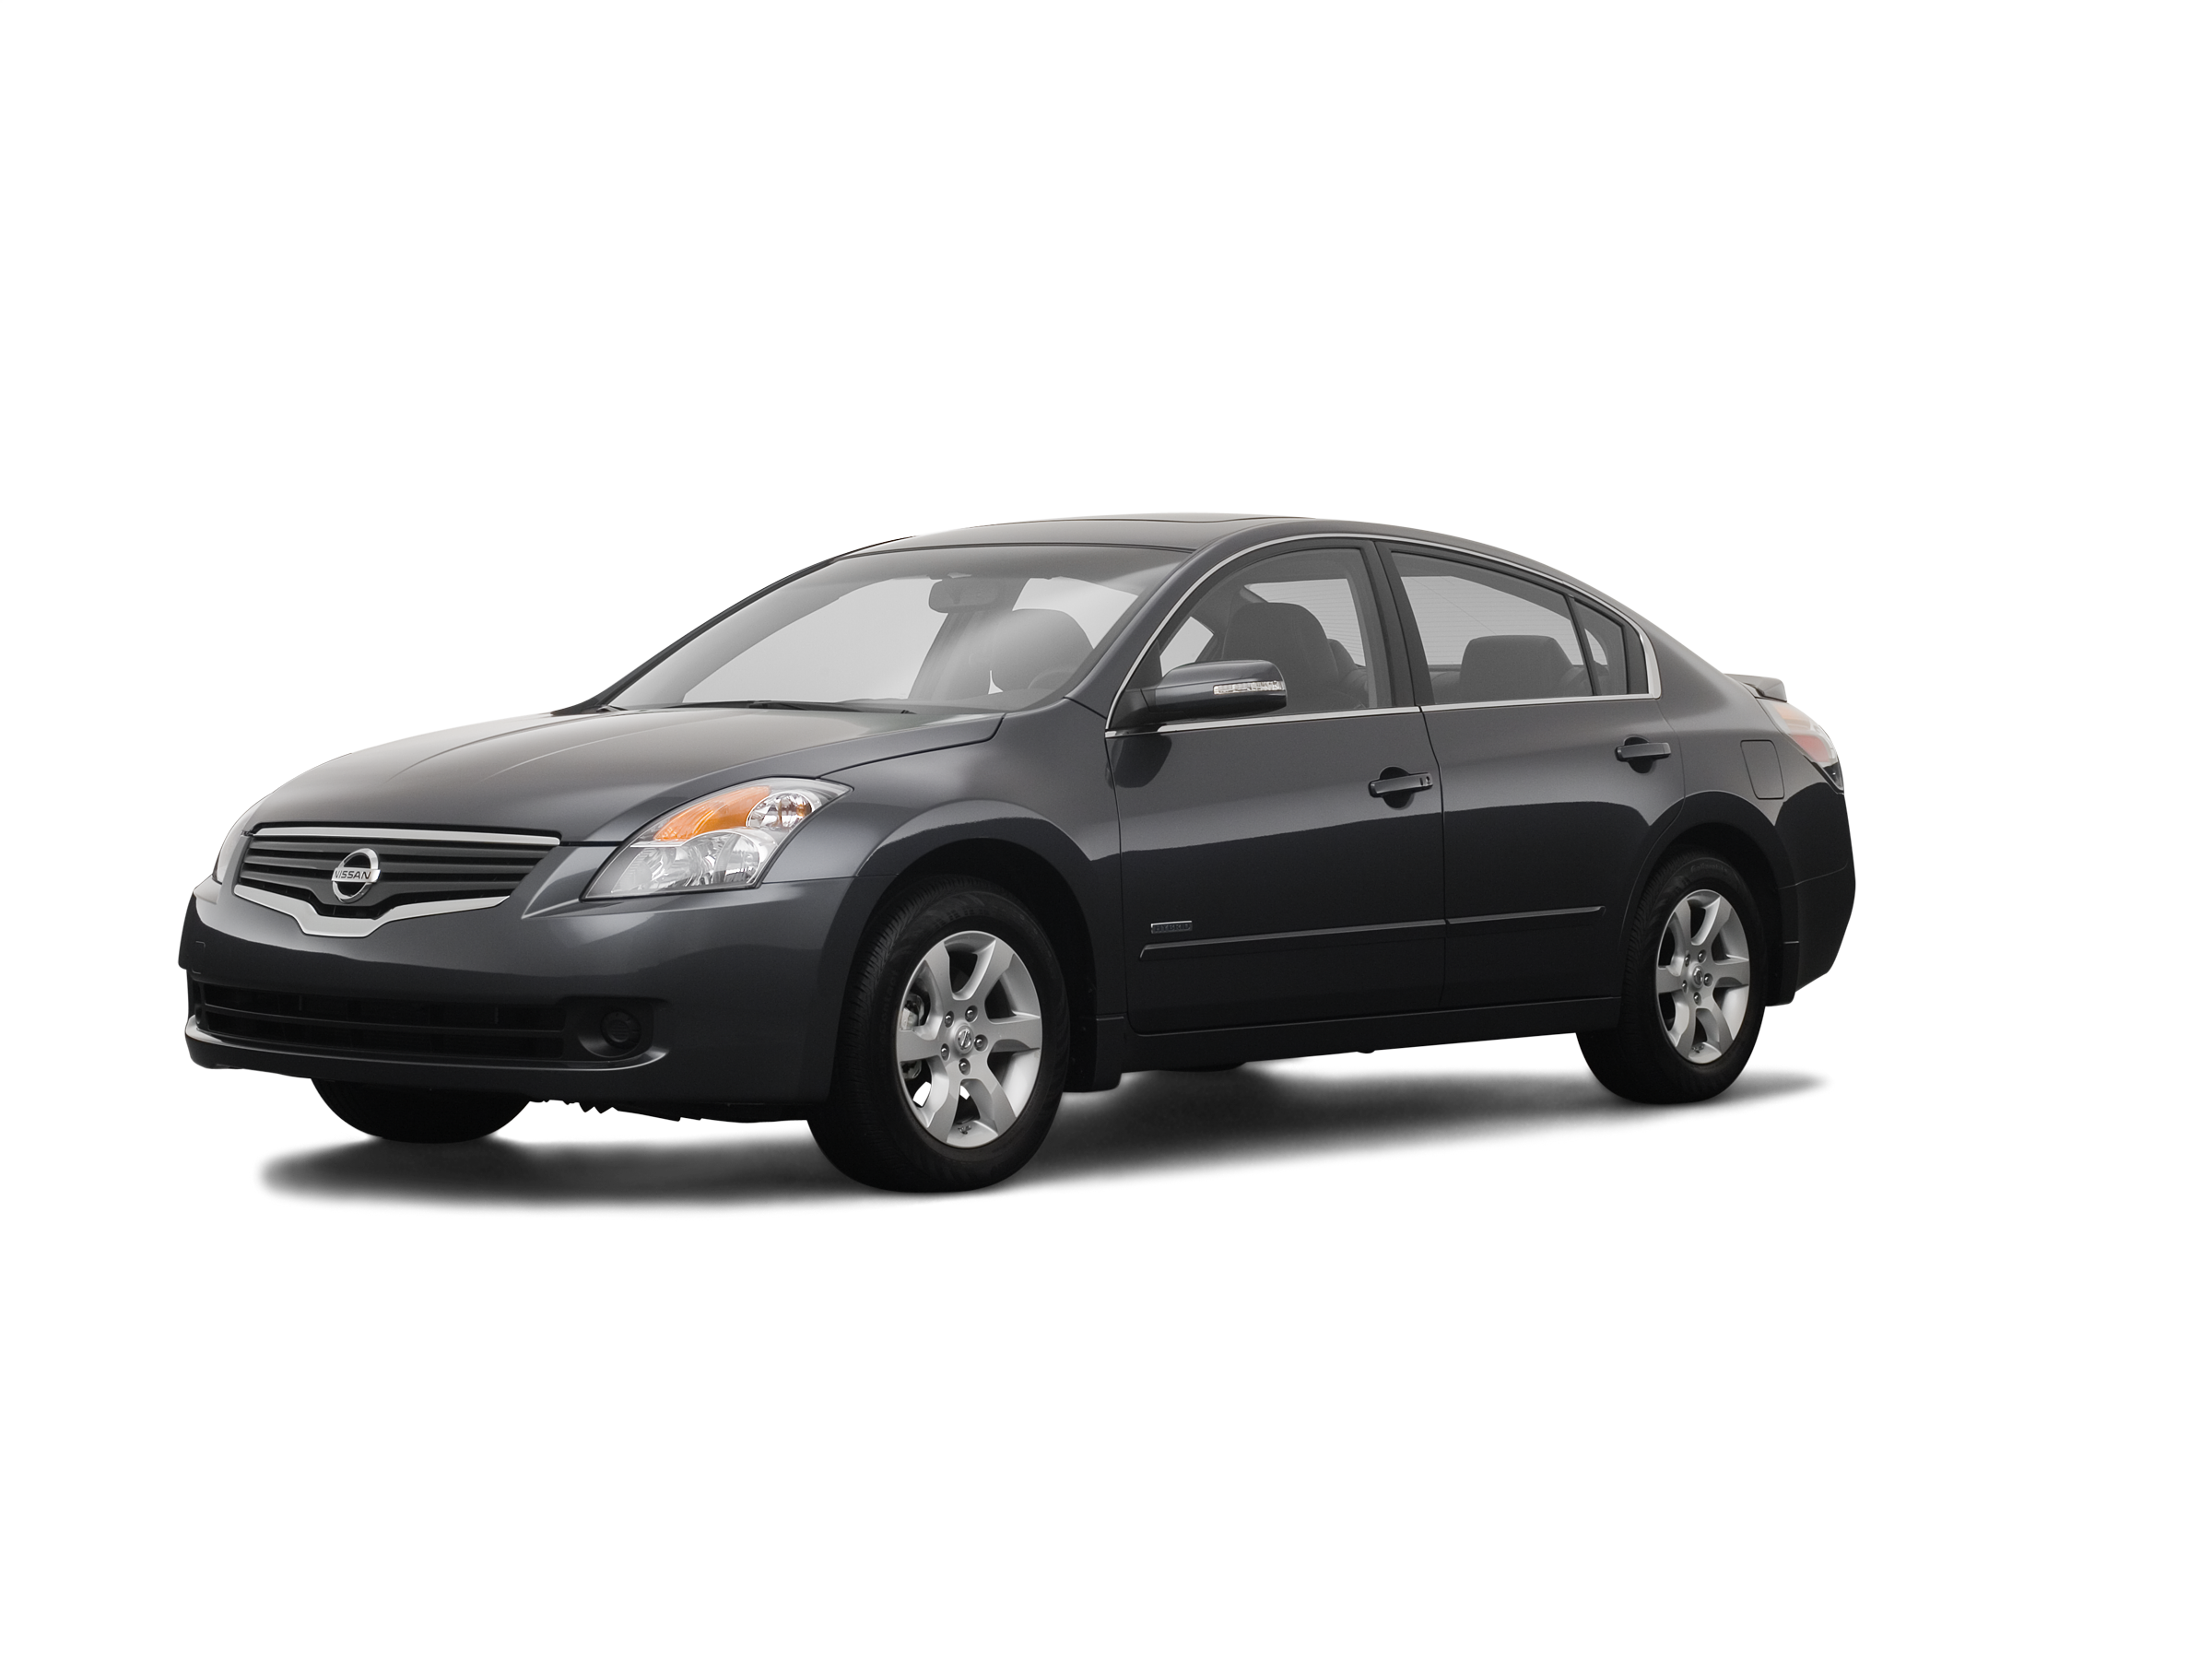 2008 Nissan Altima Price, KBB Value & Cars for Sale Kelley Blue Book